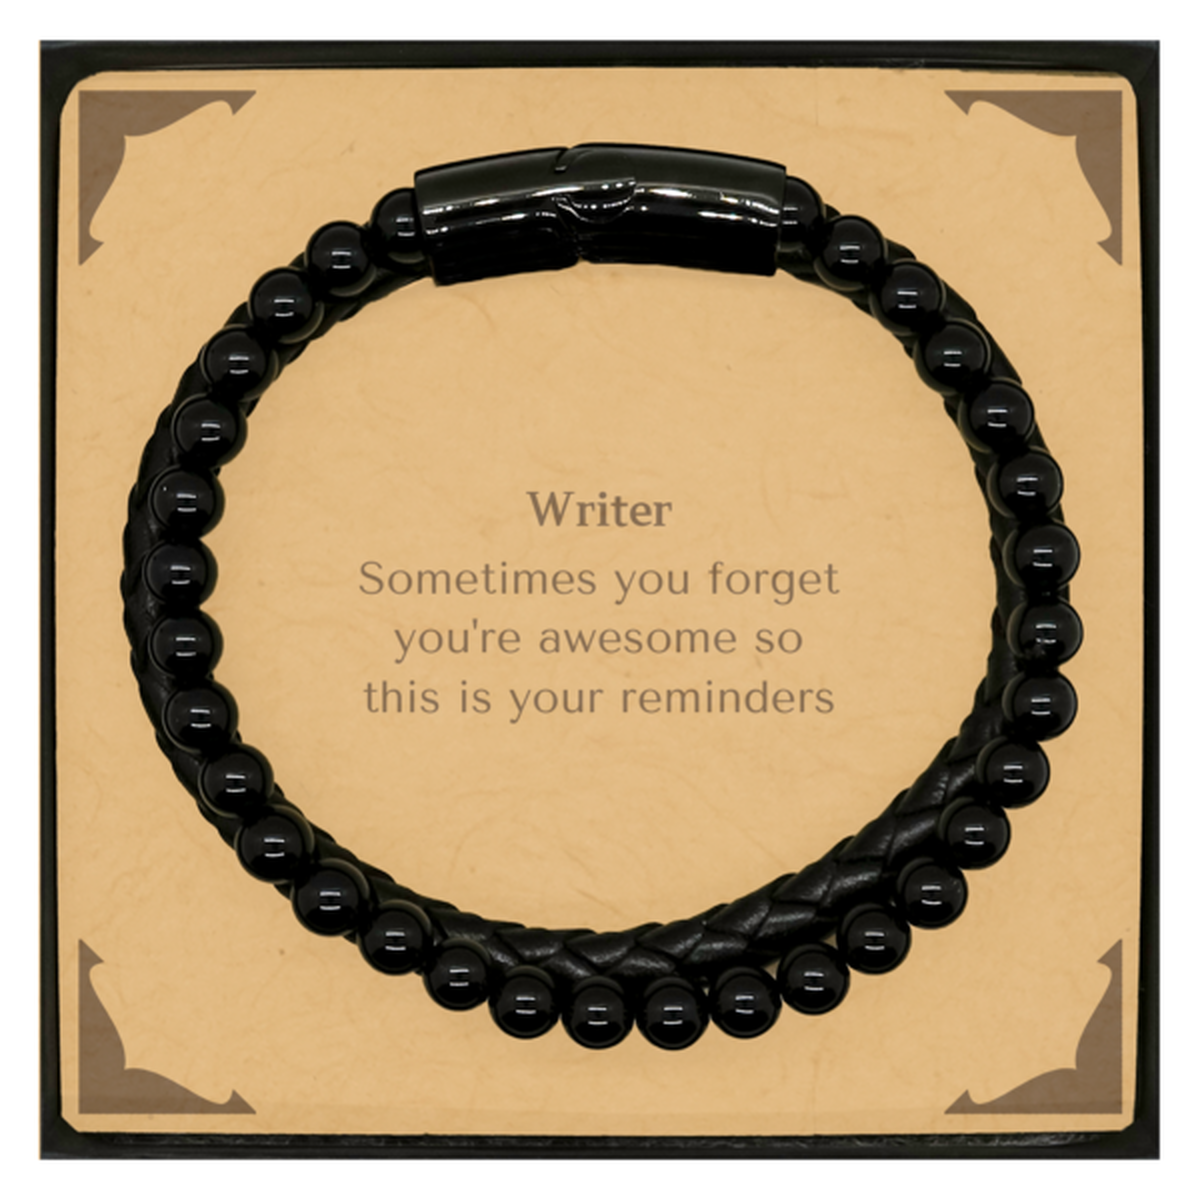 Sentimental Writer Stone Leather Bracelets, Writer Sometimes you forget you're awesome so this is your reminders, Graduation Christmas Birthday Gifts for Writer, Men, Women, Coworkers